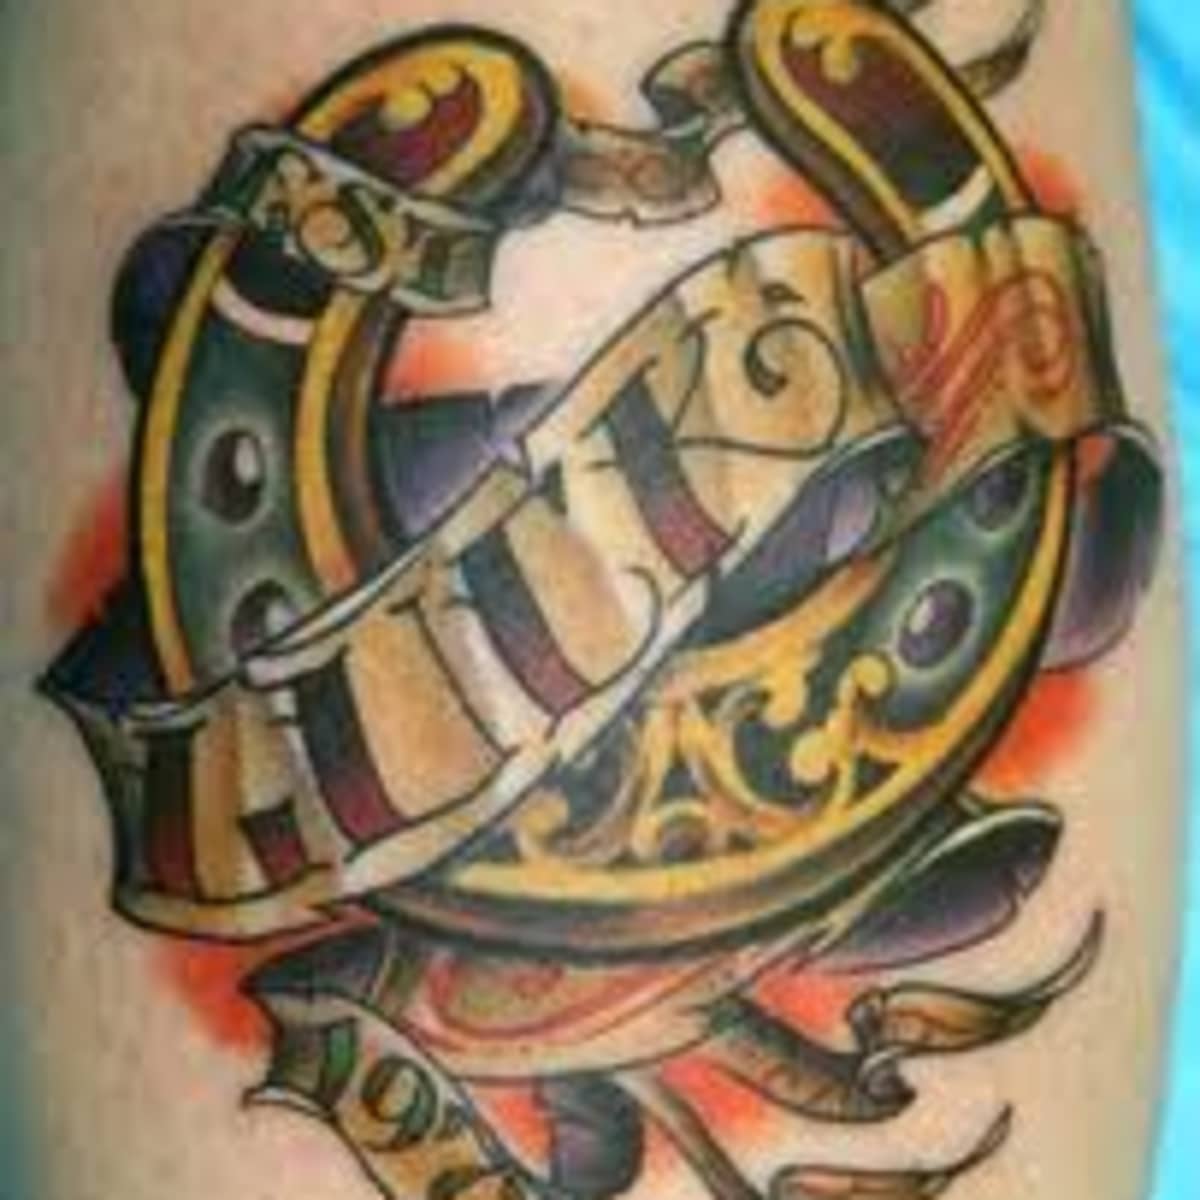 Horseshoe Tattoo Designs, Ideas, And Meanings; Horseshoe Tattoo Pictures - HubPages